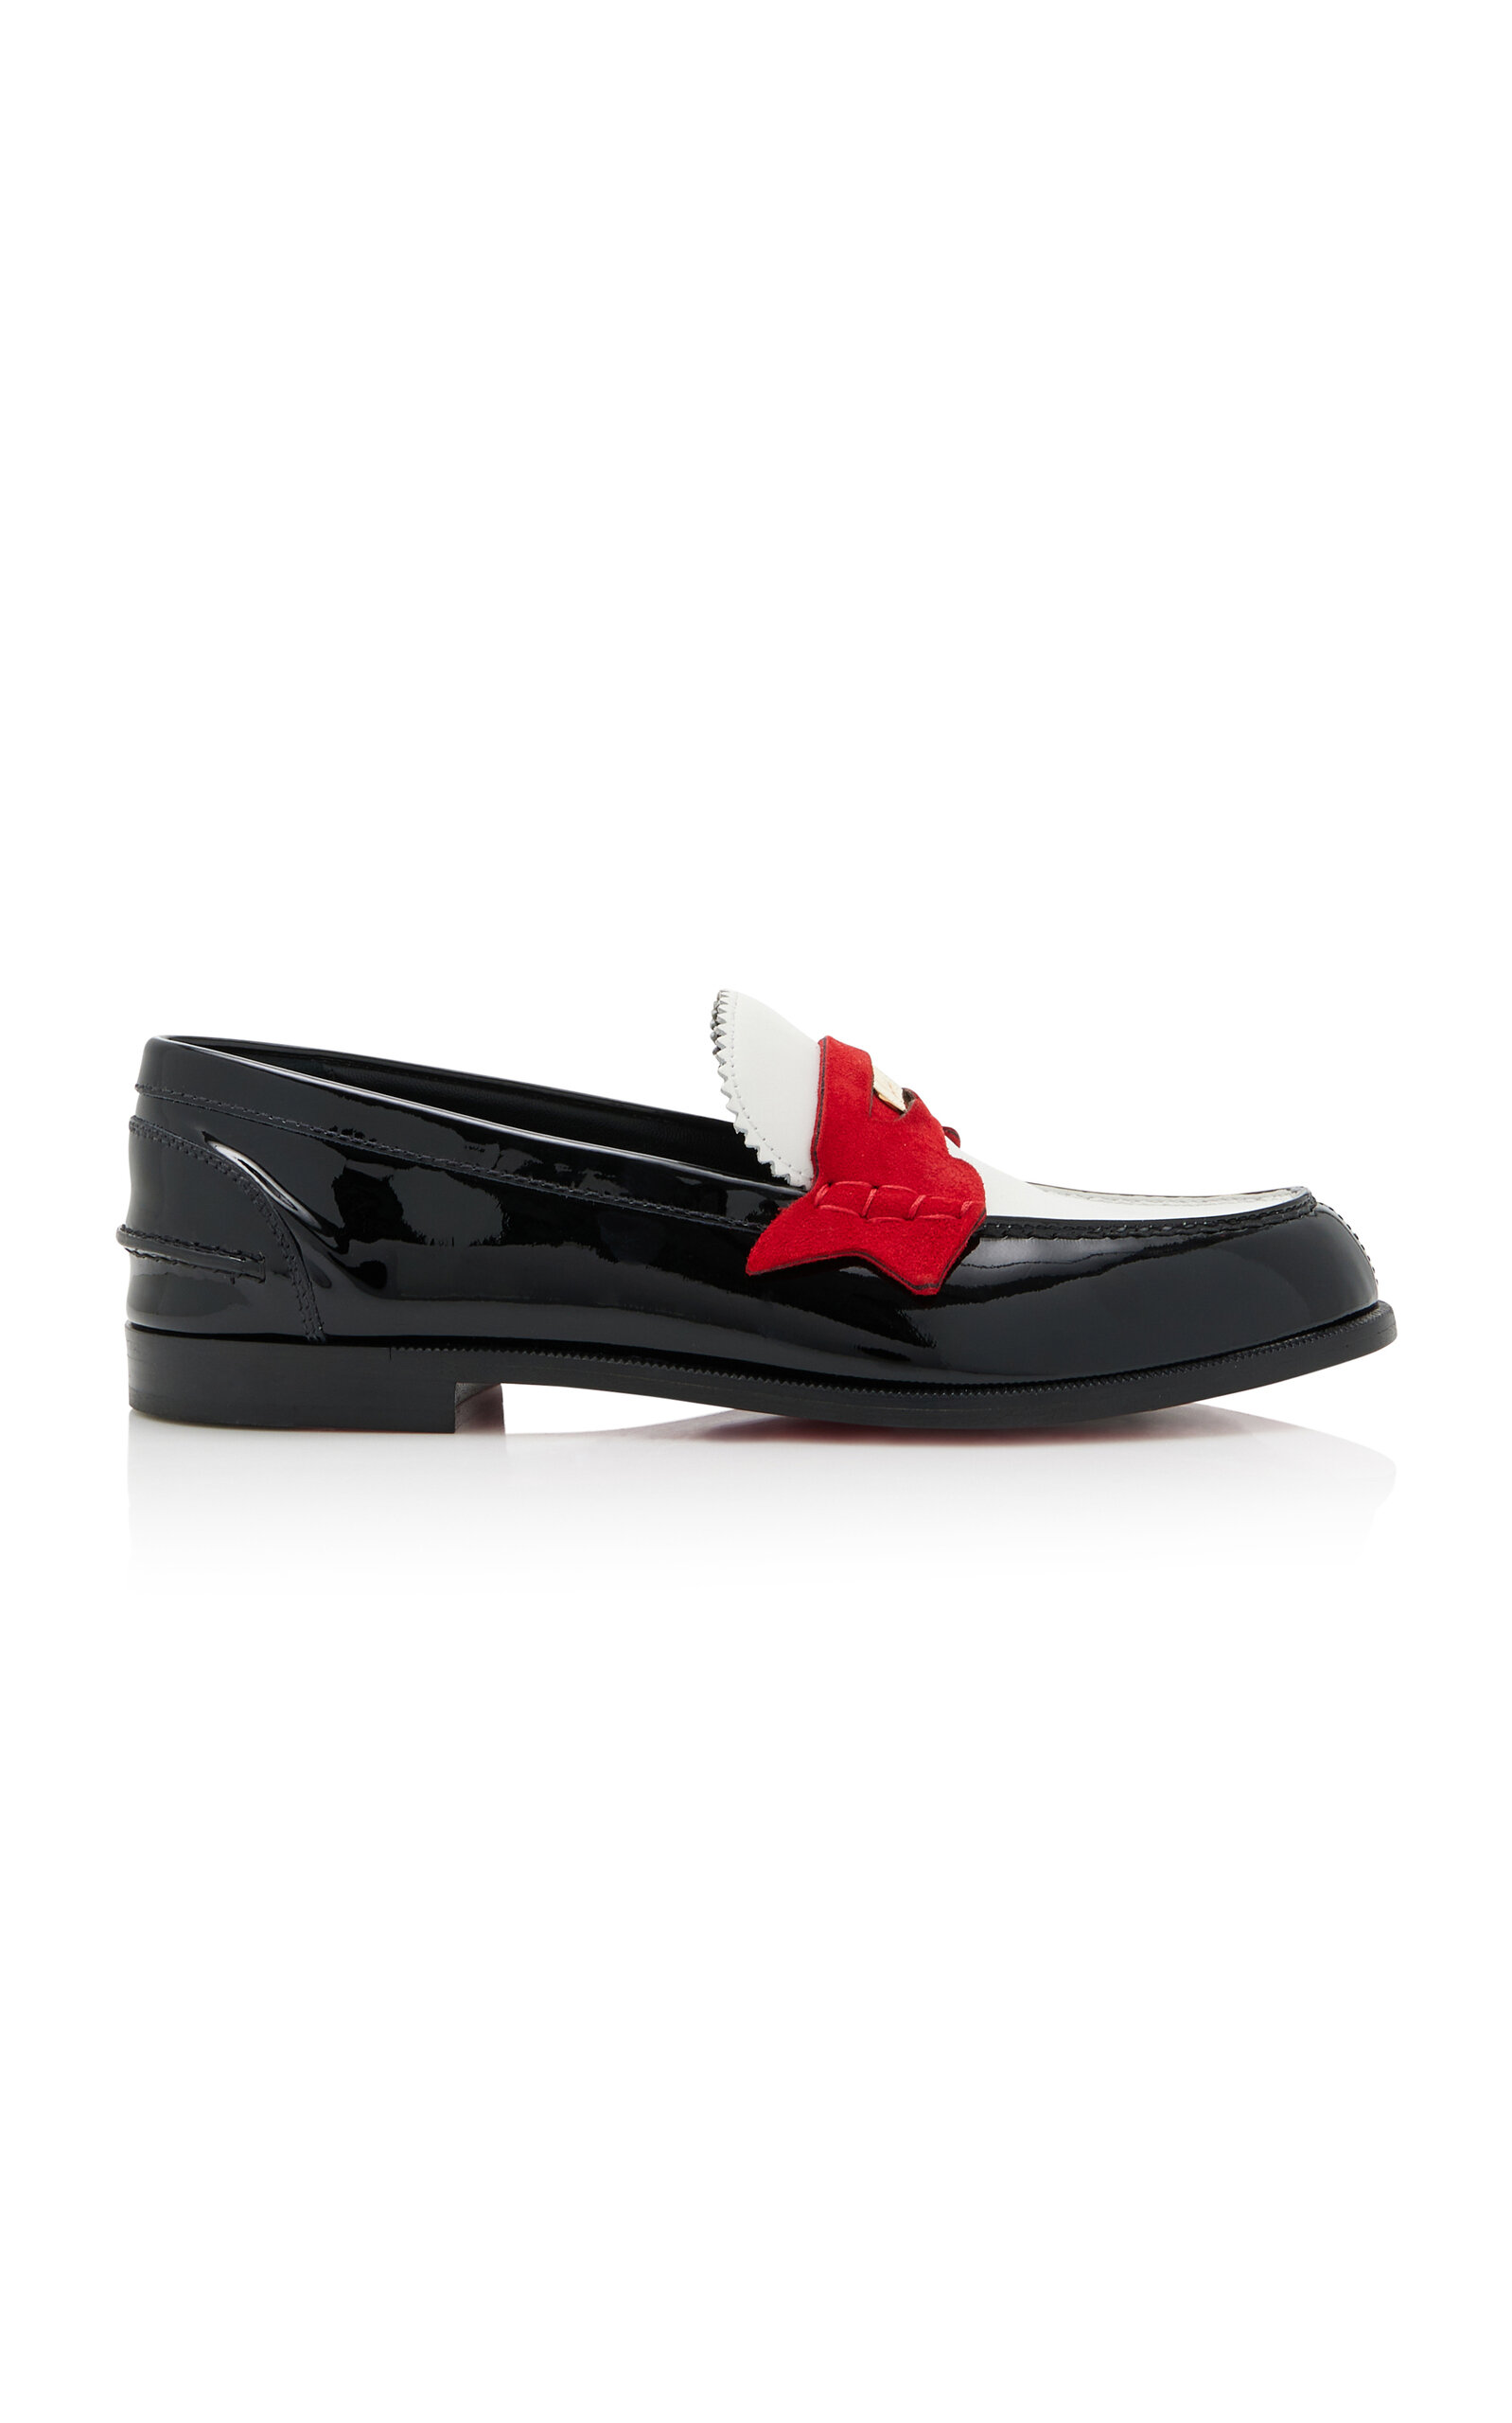 CHRISTIAN LOUBOUTIN DONNA LEATHER PENNY LOAFERS